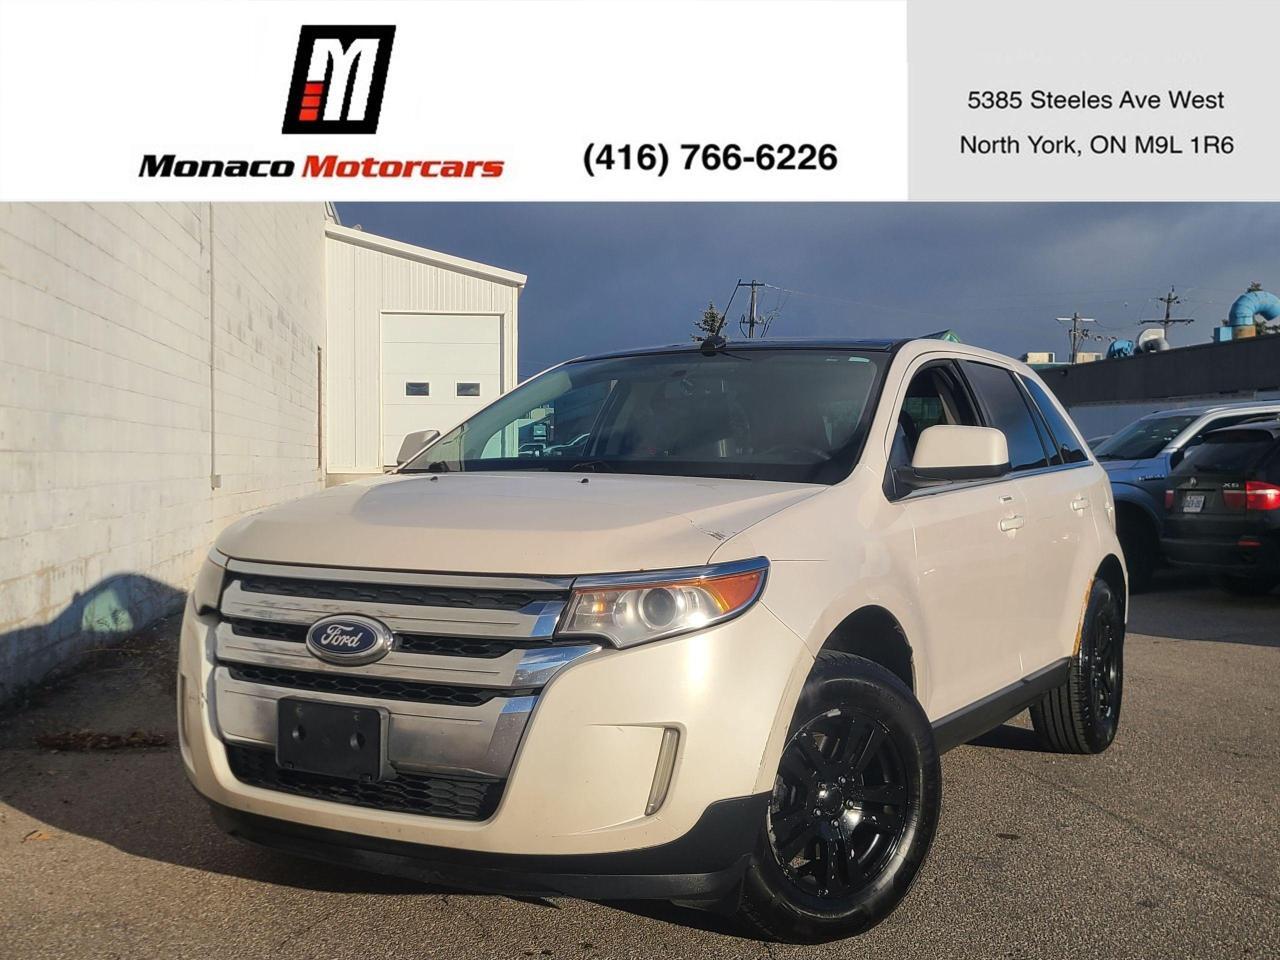 2011 Ford Edge LIMITED - AS IS VEHICLE|PANO|NAVI|REMOTE START